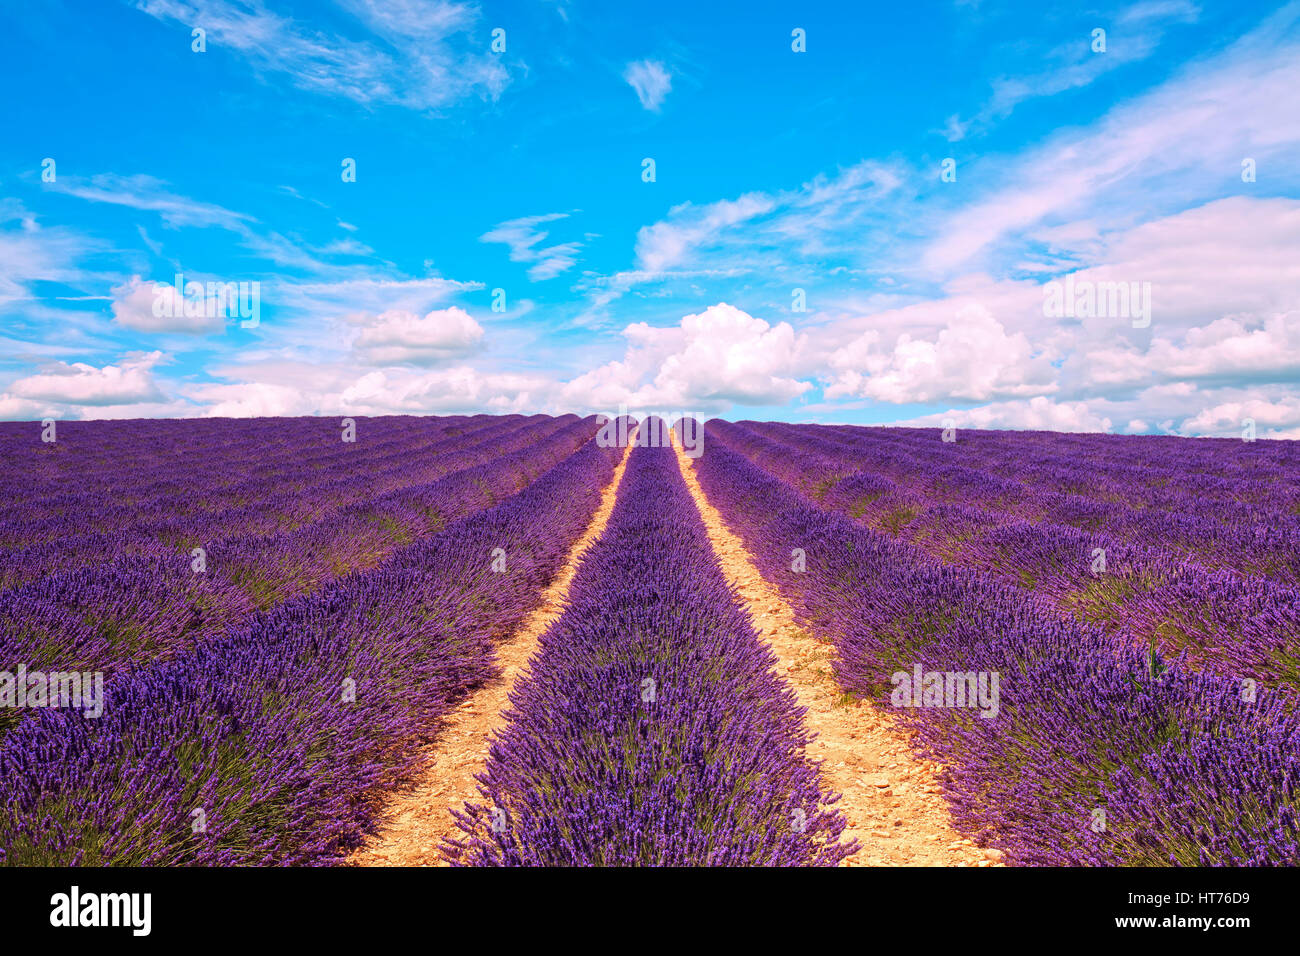 Lavender flowers blooming field and cloudy sky. Valensole, Provence, France, Europe. Stock Photo